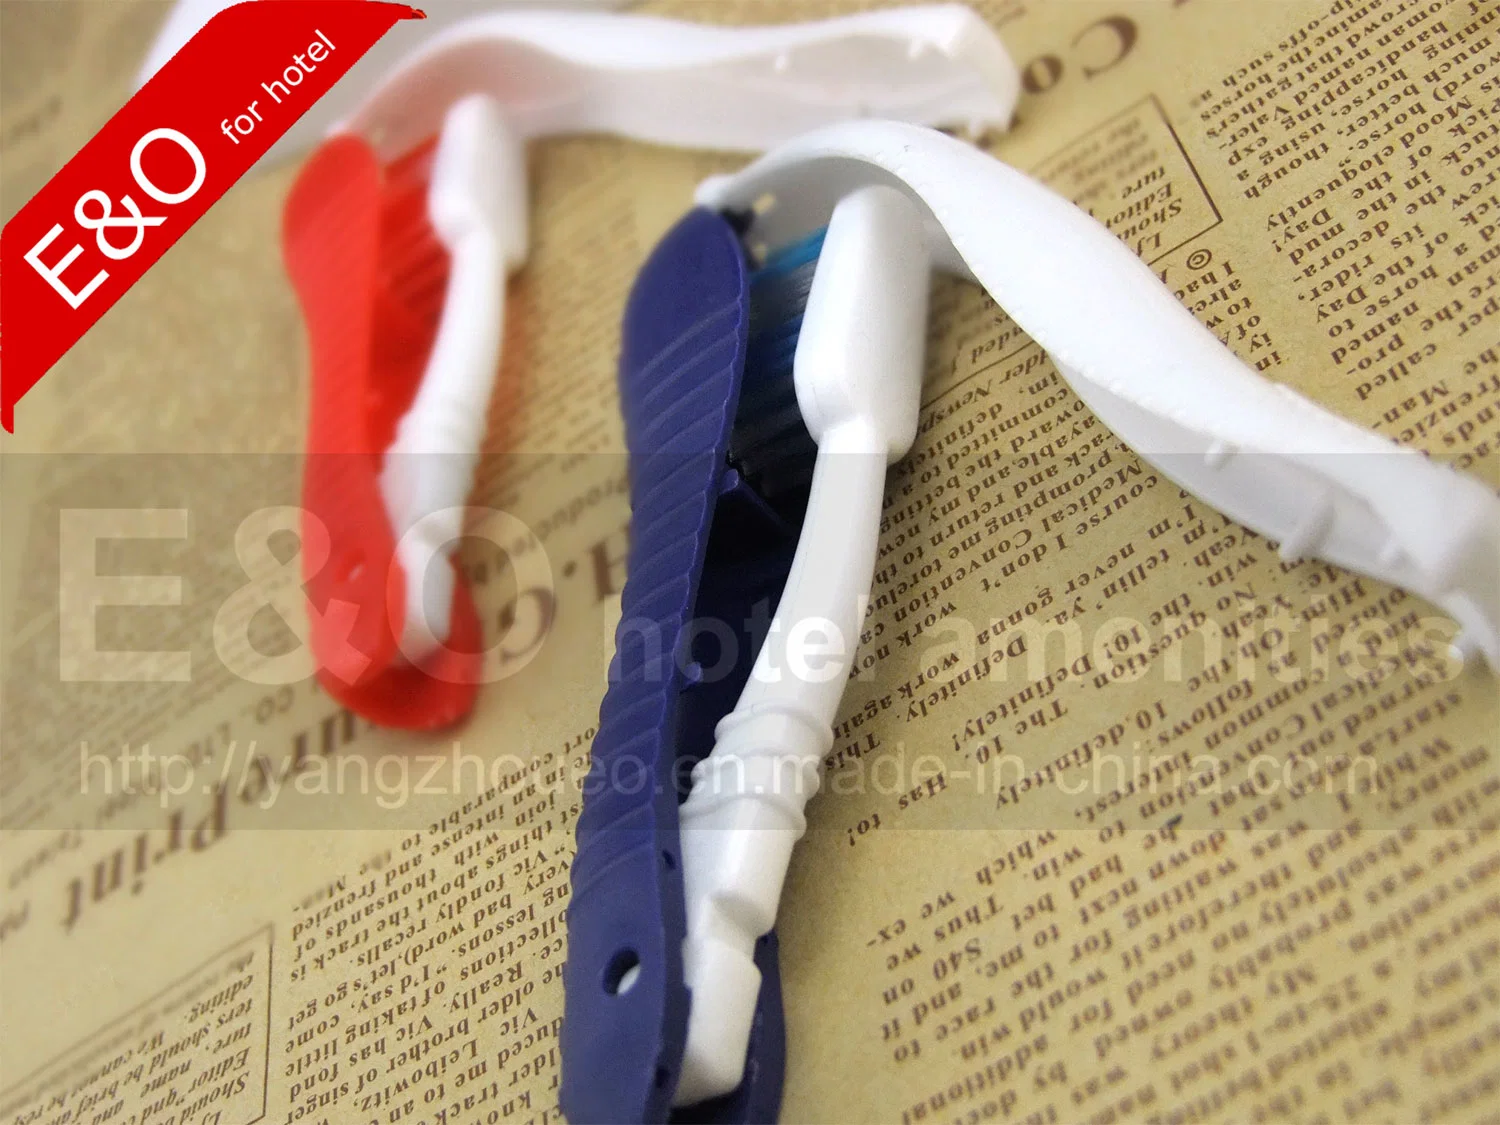 Travel Small Foldable Plastic Toothbrush for Hotel